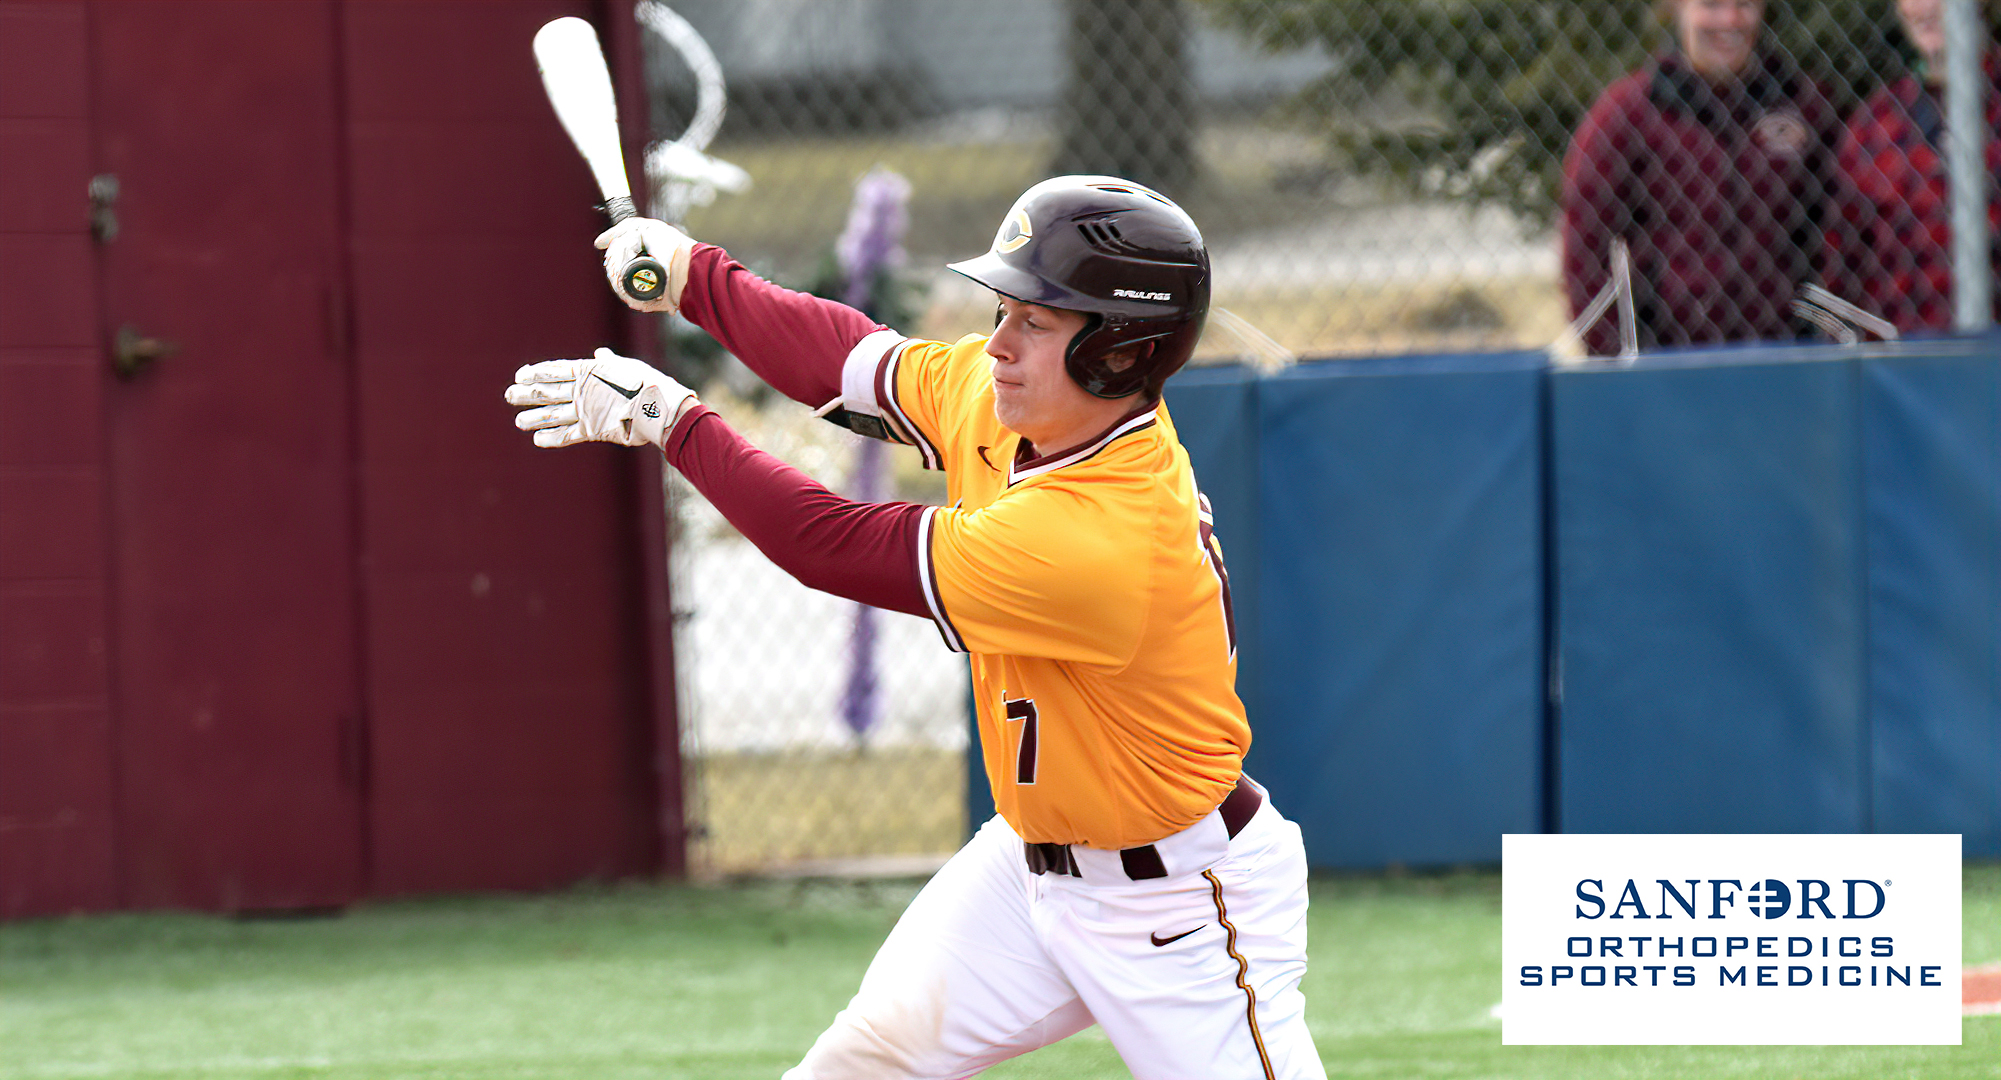 Junior Andy Gravdahl had a pair of triples in the Cobbers' 5-4 walk-off win over Wis.-Superior in Game 2 of the DH. He went 3-for-5 with three extra-base hits to lead the CC offense in the sweep.